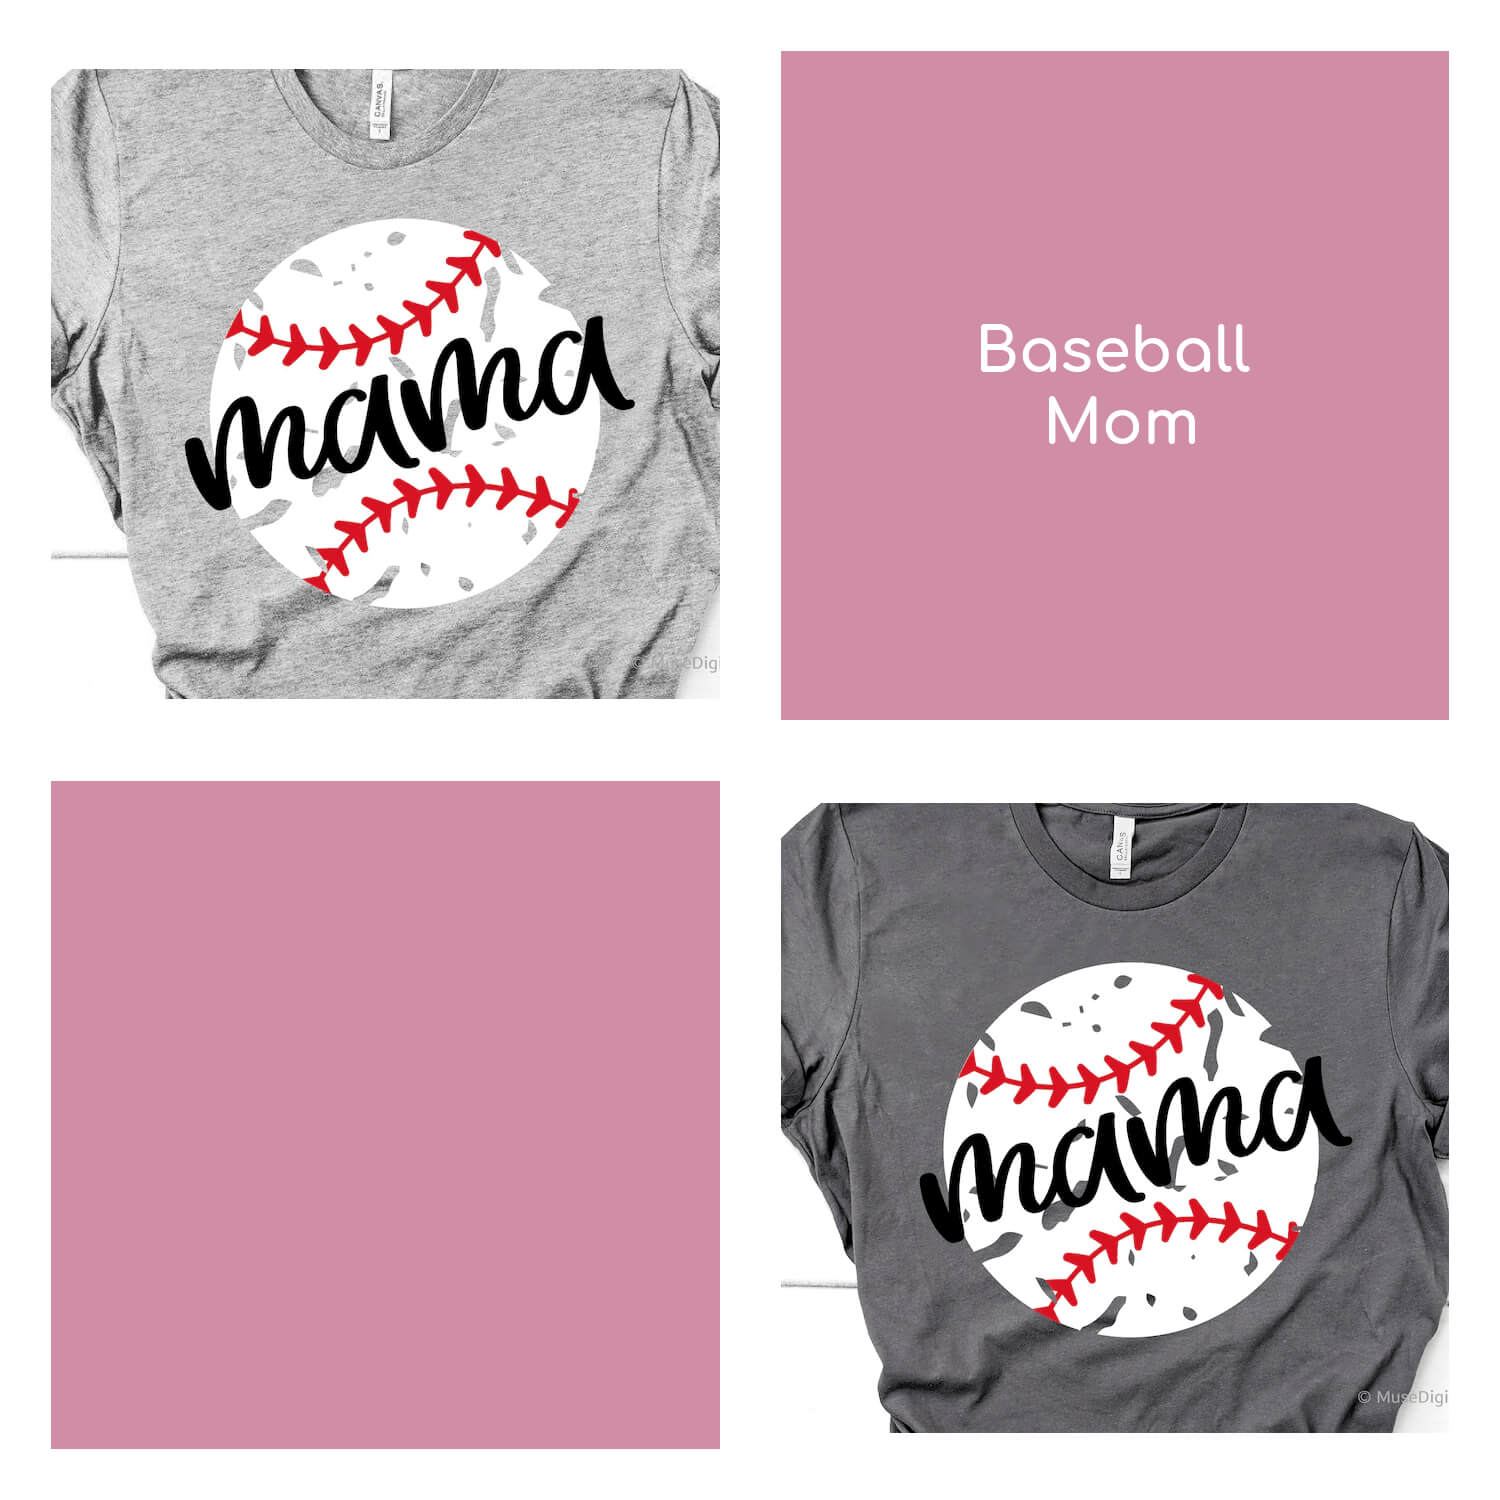 Four tiled dice, two t-shirts with prints and two with "Baseball Mama" written on a pink background.